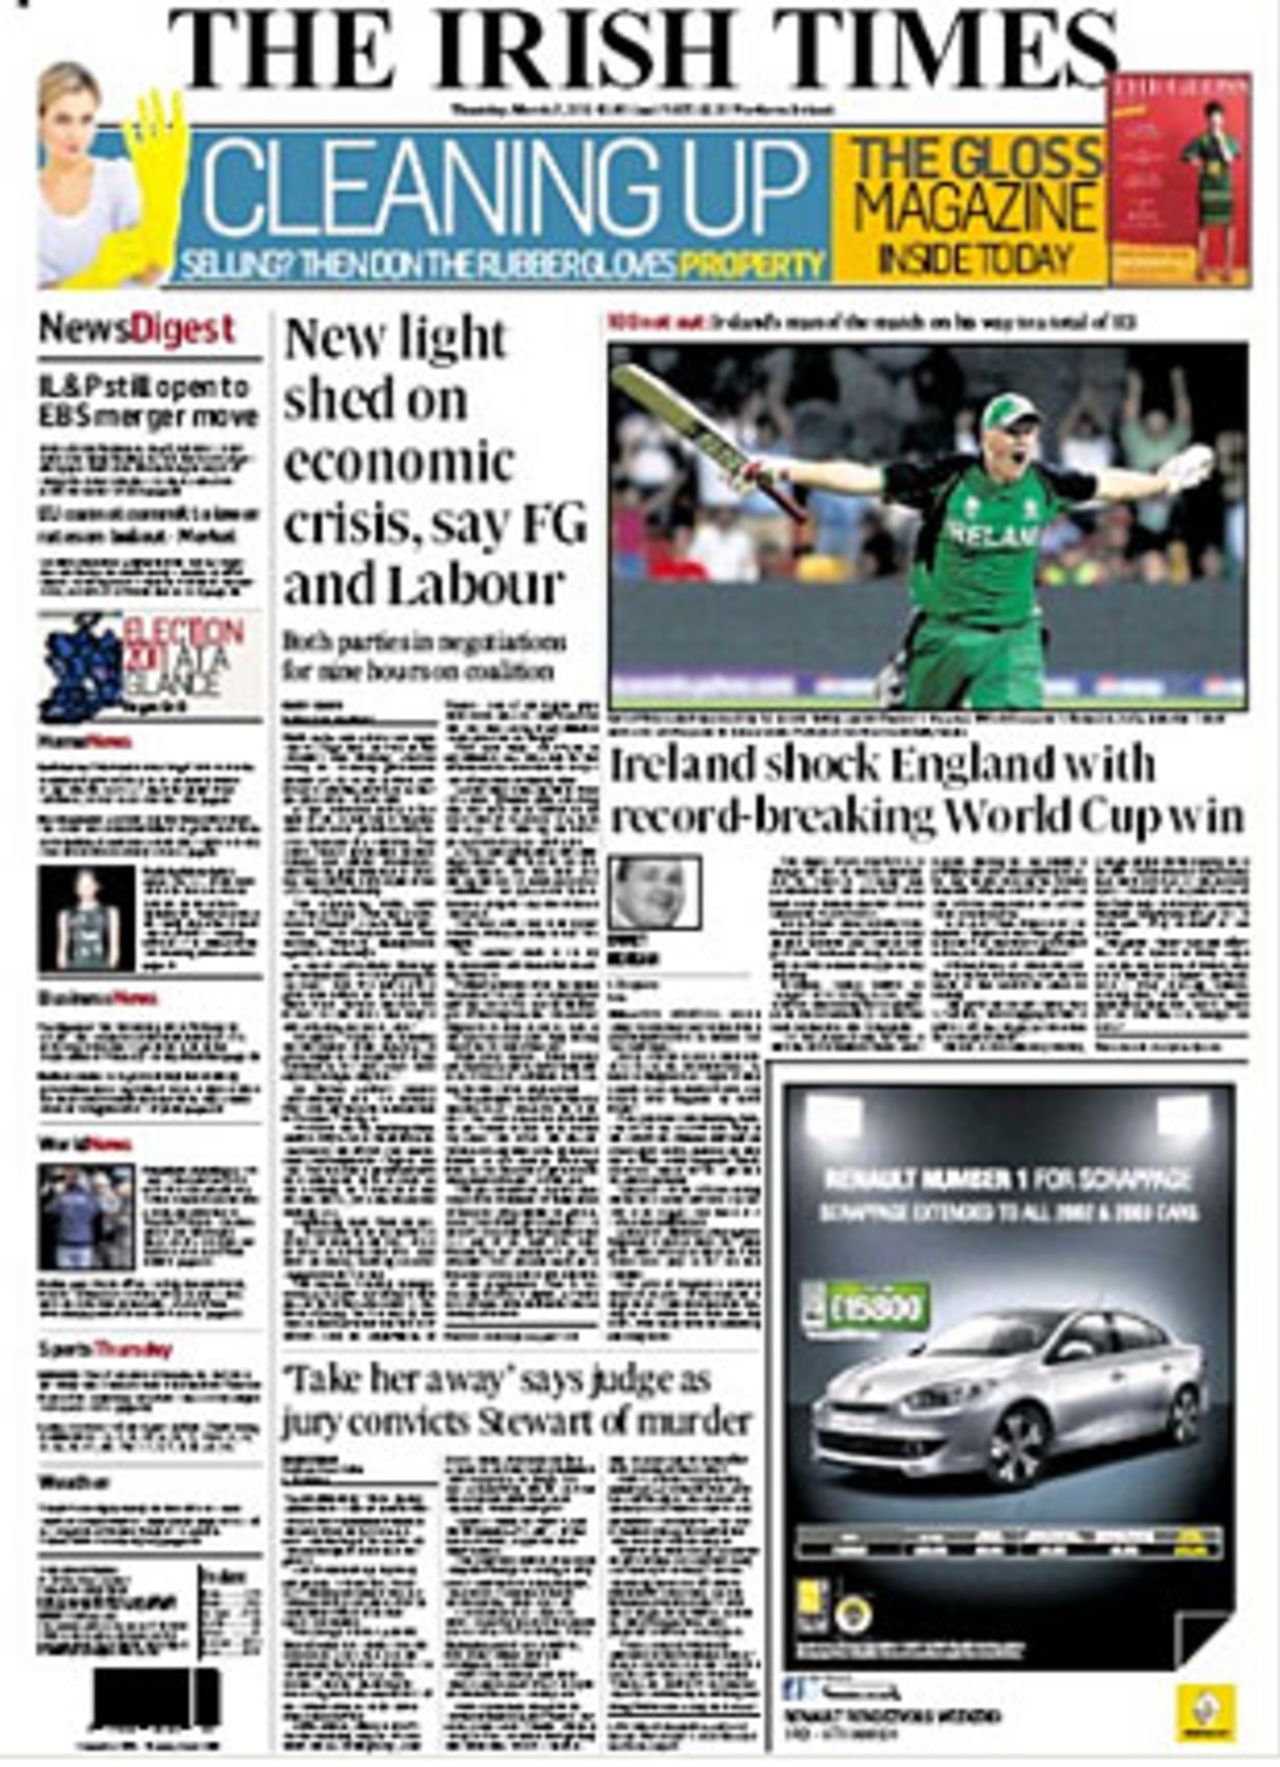 Ireland's win against England makes it to the front page of the <i>Irish Times</i> , England v Ireland, Group B, World Cup, Bangalore, March 2, 2011